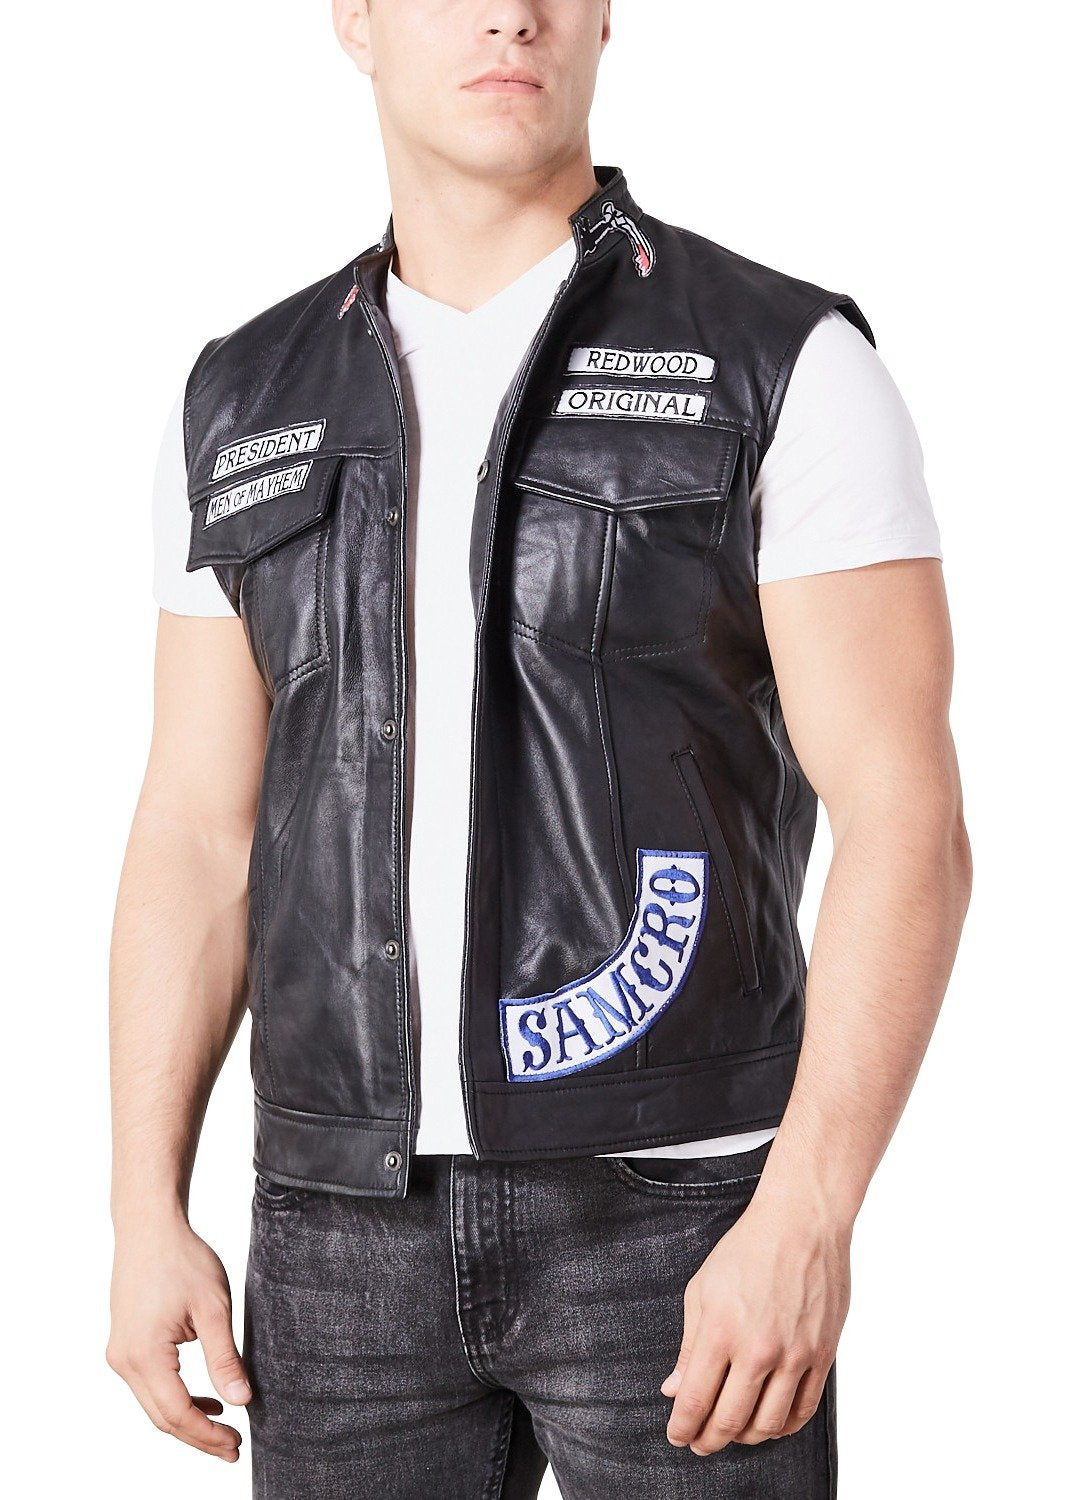 MENS SOA SONS OF ANARCHY MENS REAL LEATHER JACKET VEST HARLEY MOTO STYLE NEW 